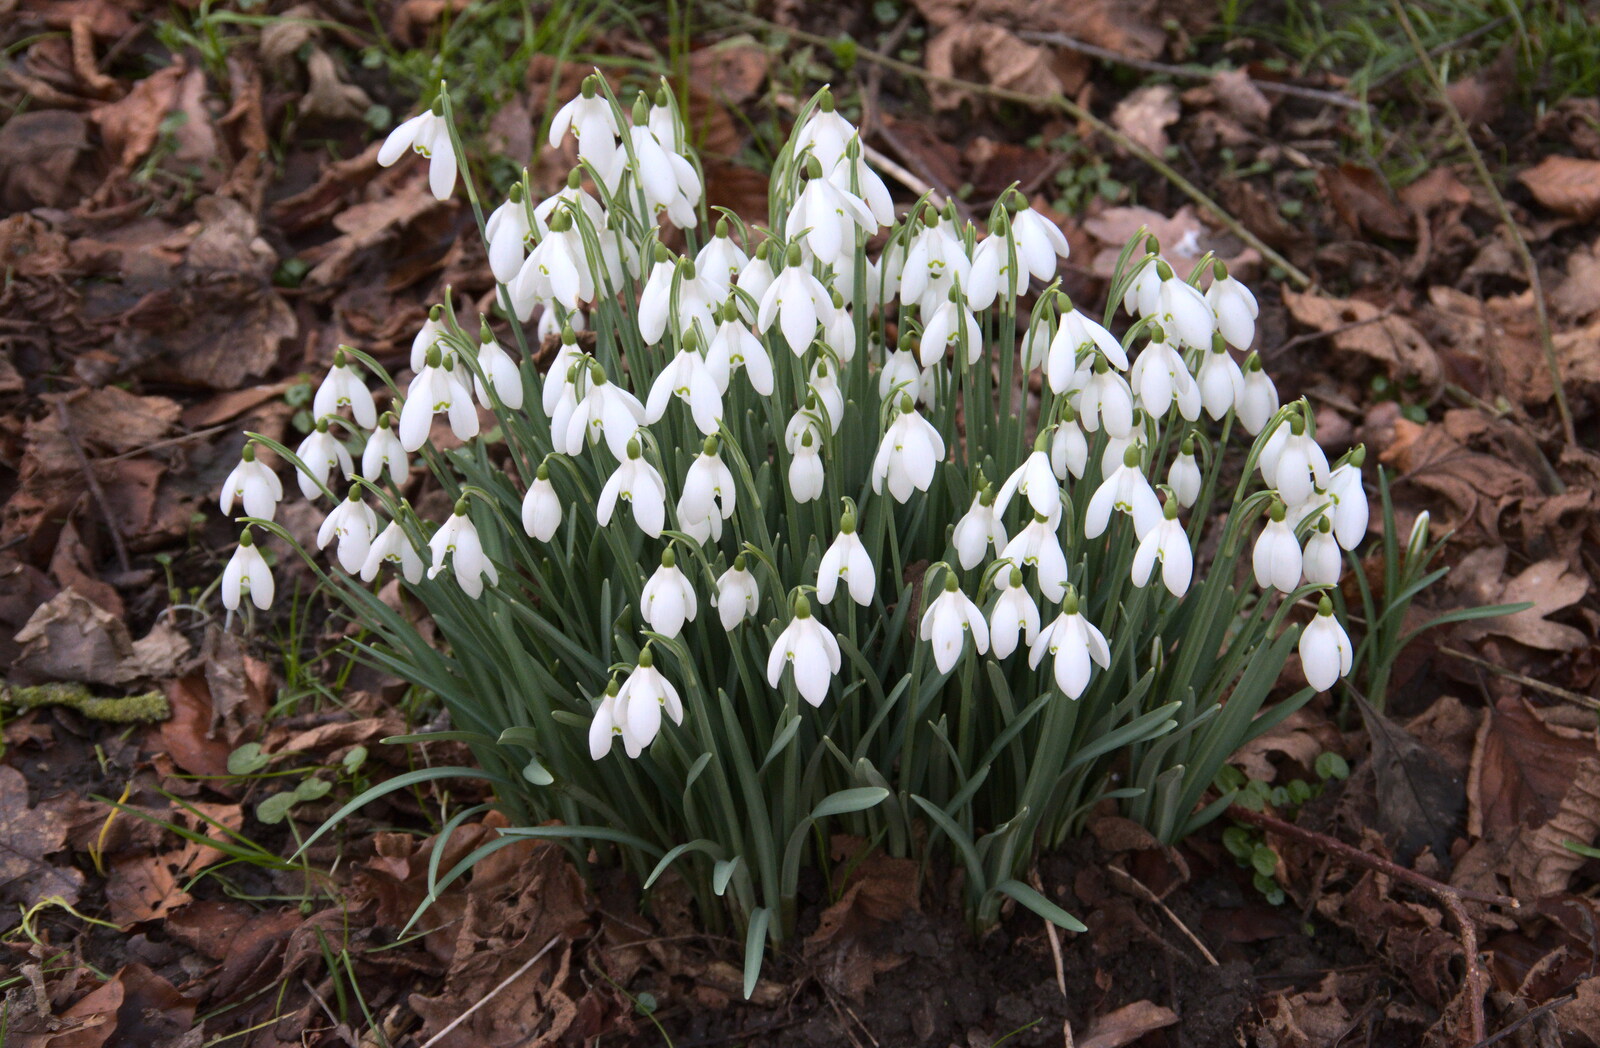 The snowdrops of early spring from Snowdrops at Talconeston Hall, Tacolneston, Norfolk - 7th February 2020